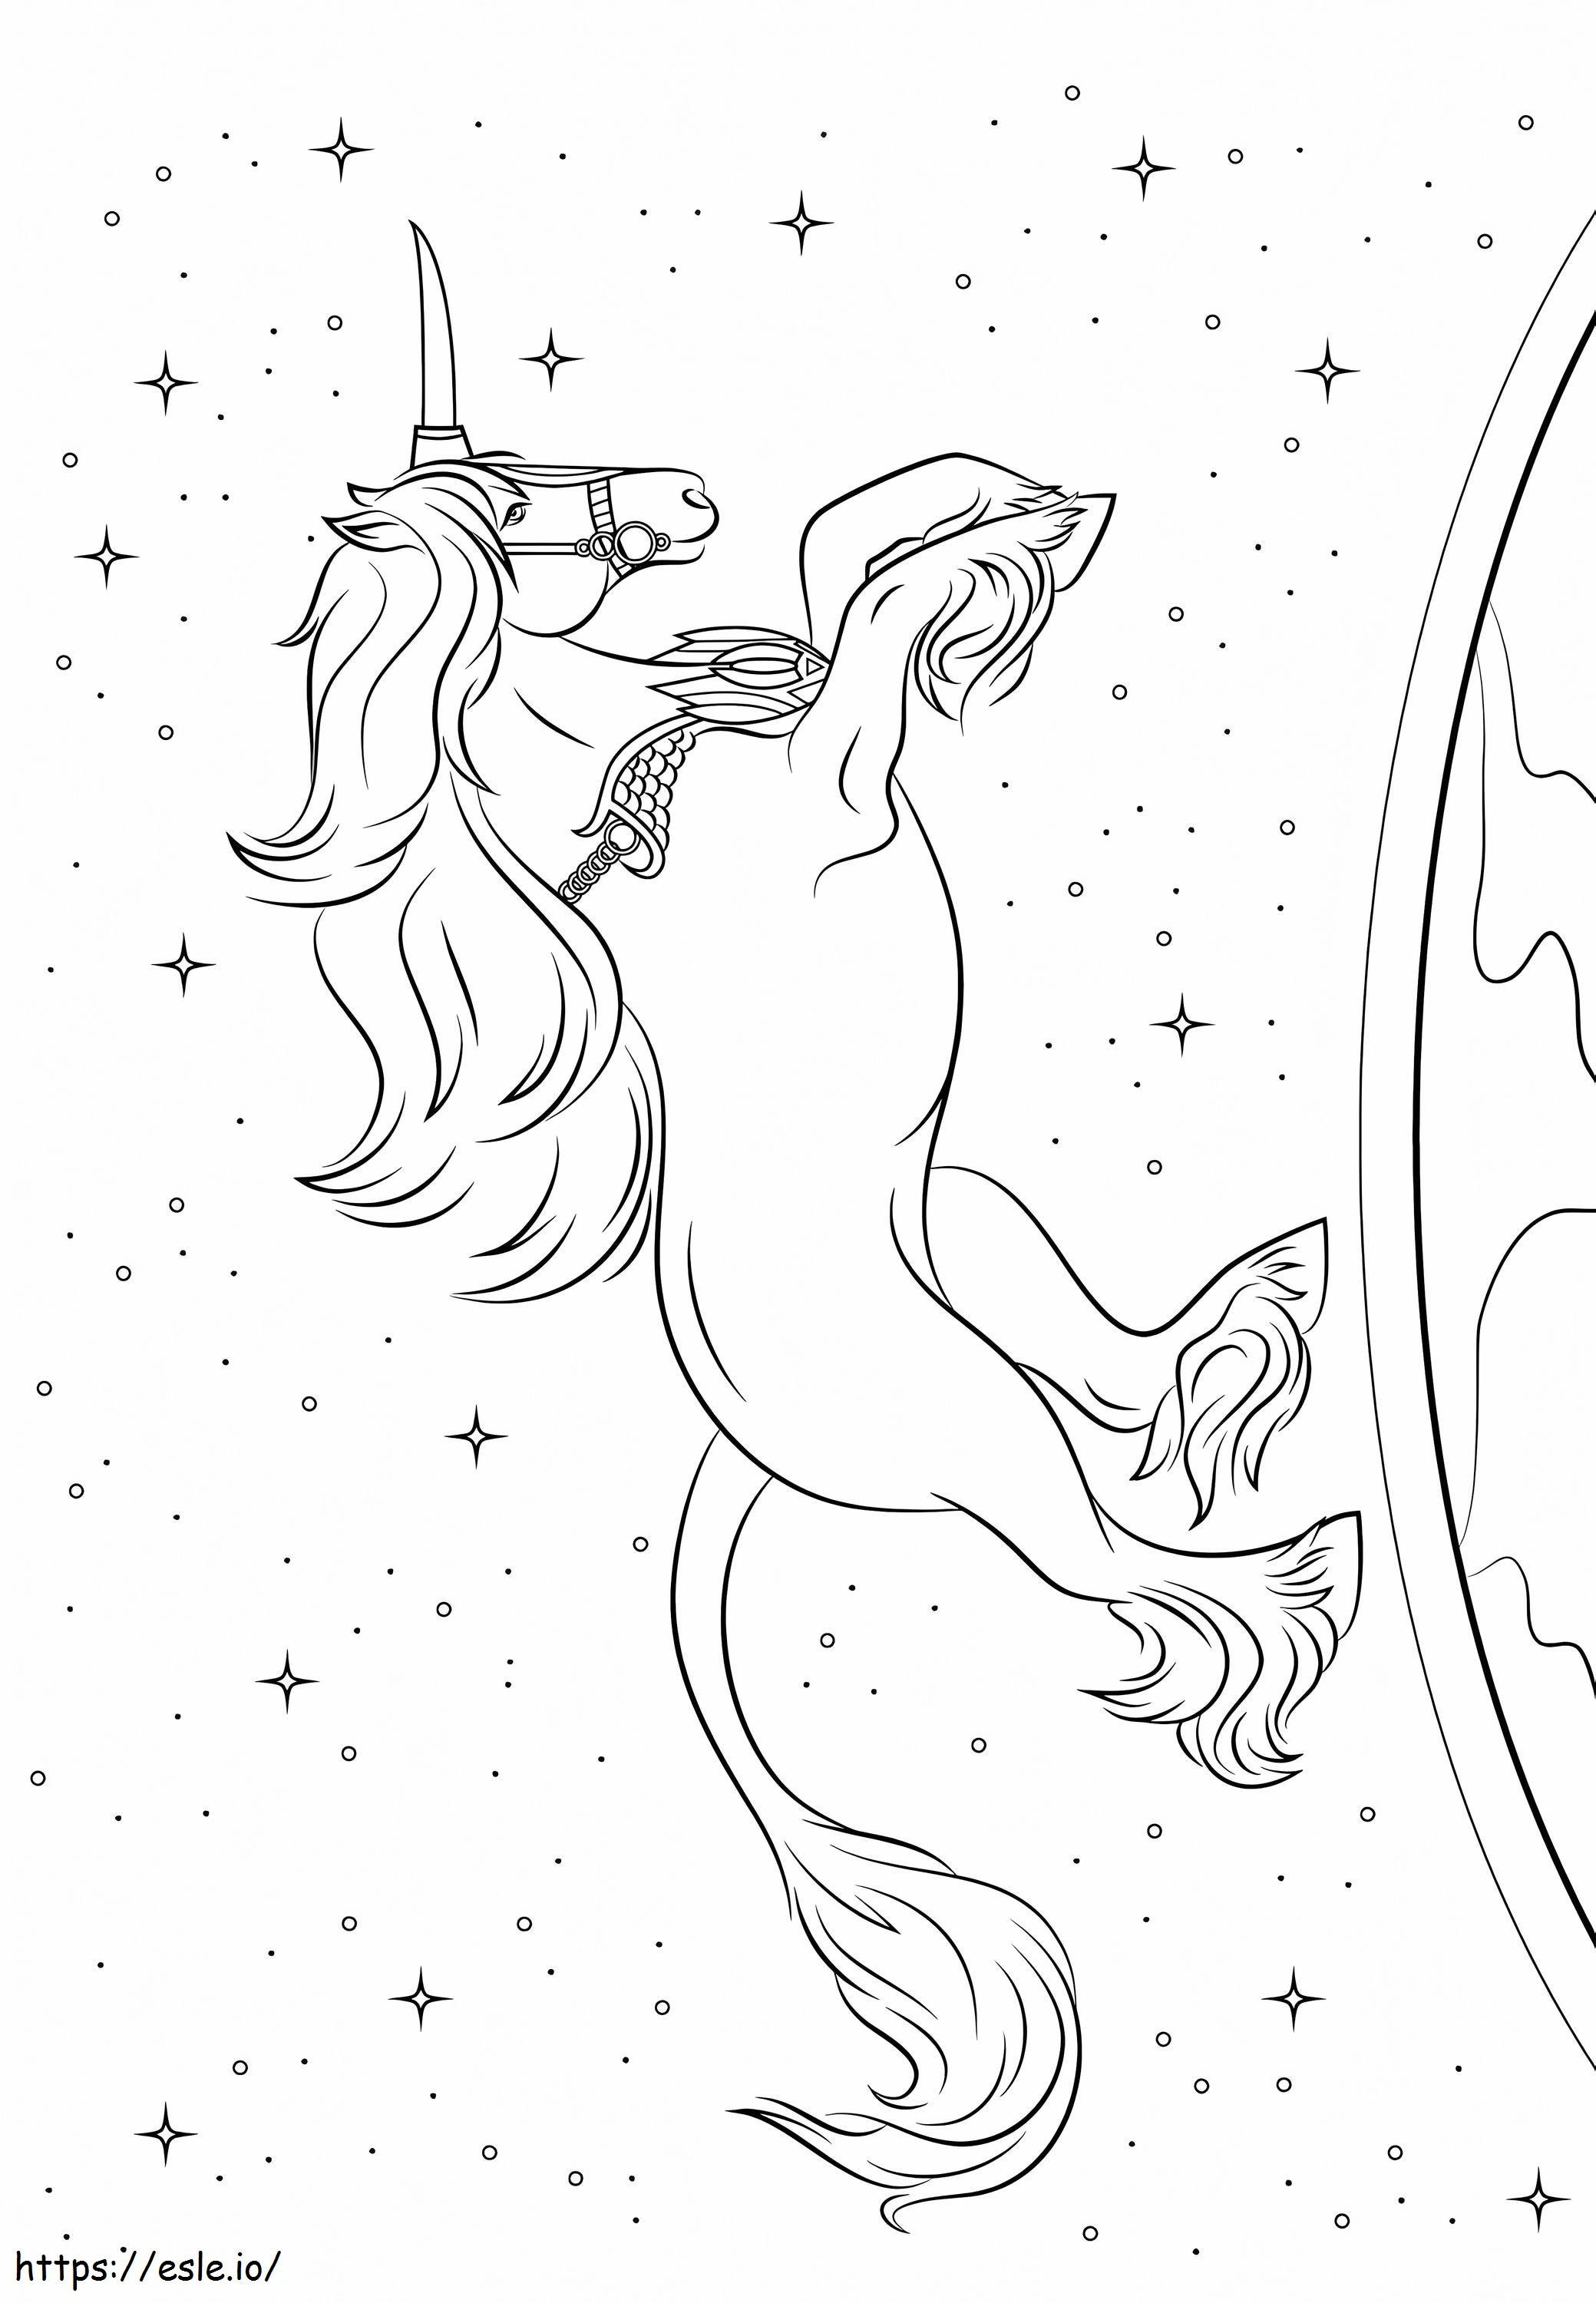 1563843475 Unicorn Moving A4 coloring page